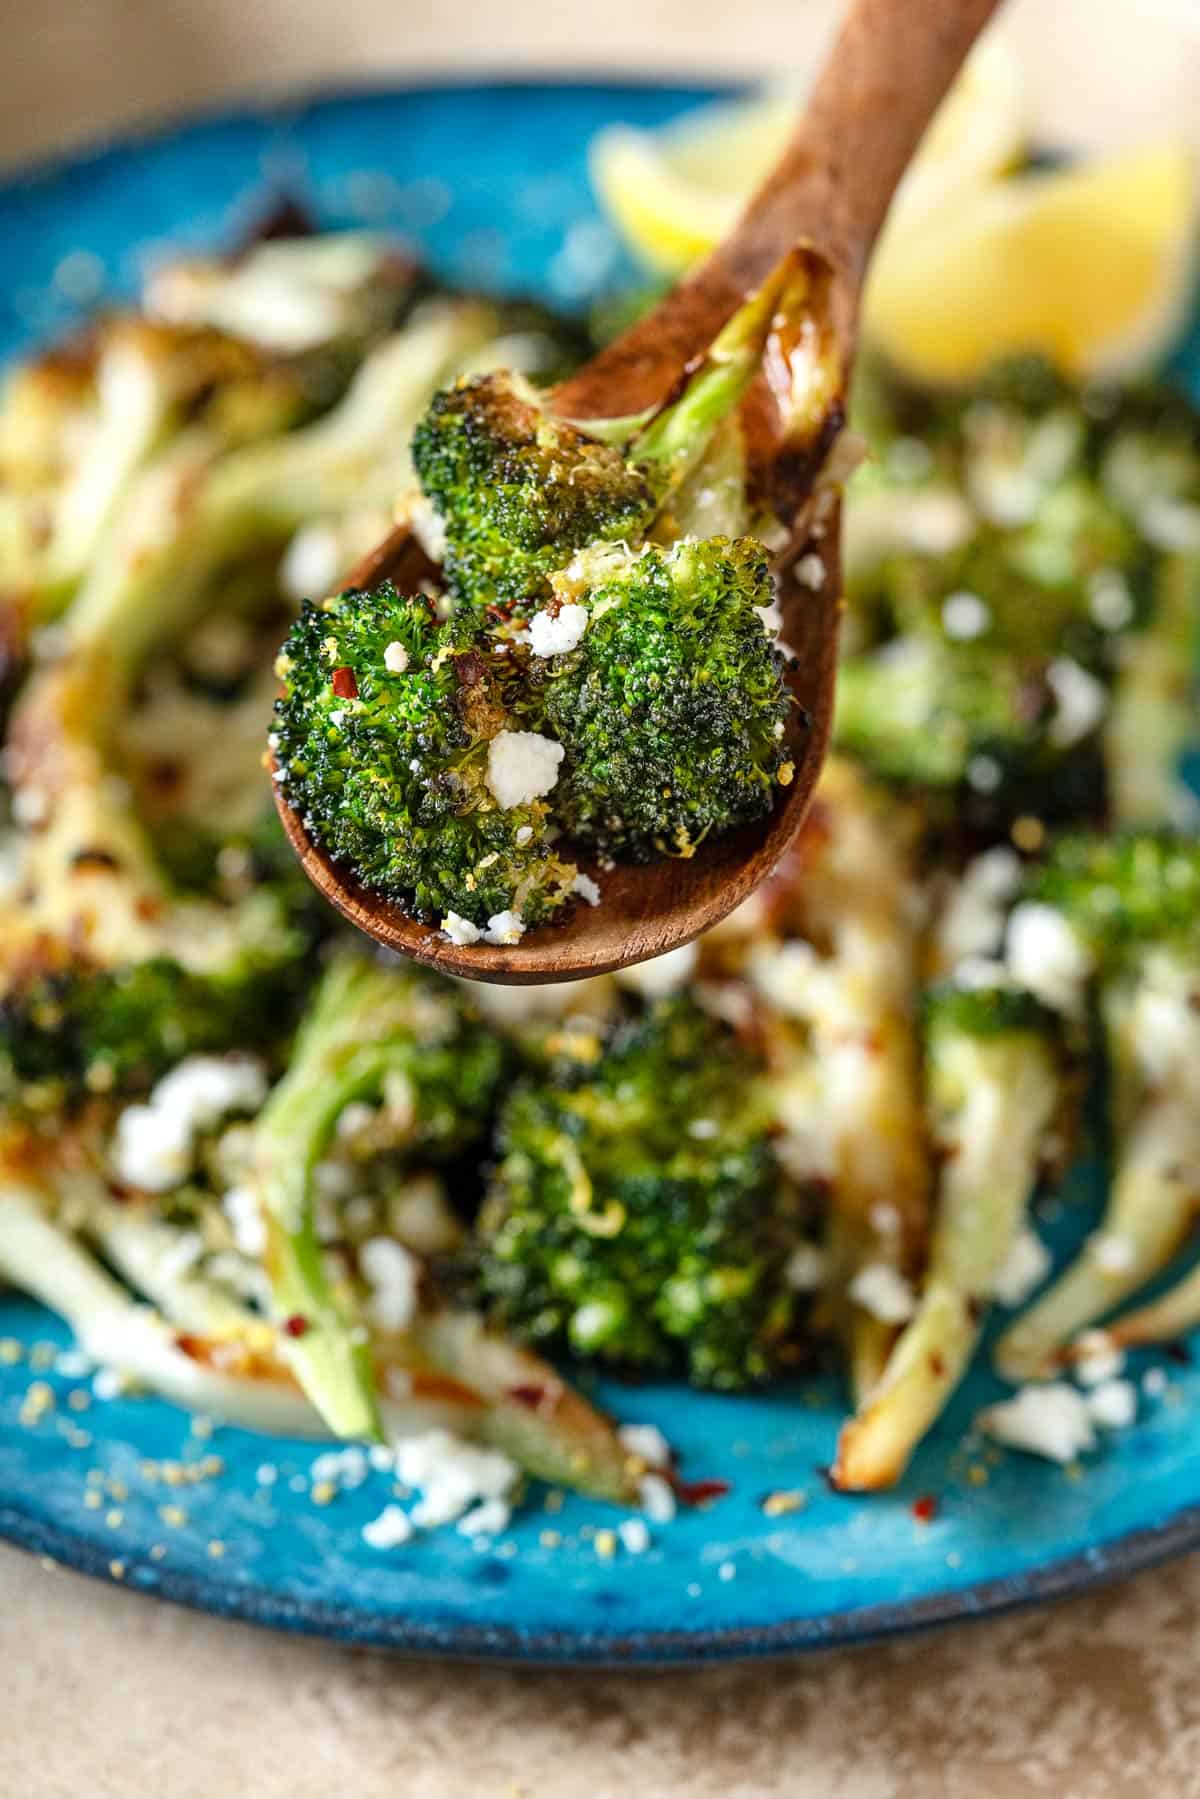 a close up of a bite of roasted broccoli on wooden serving spoon being lifted from the plate.